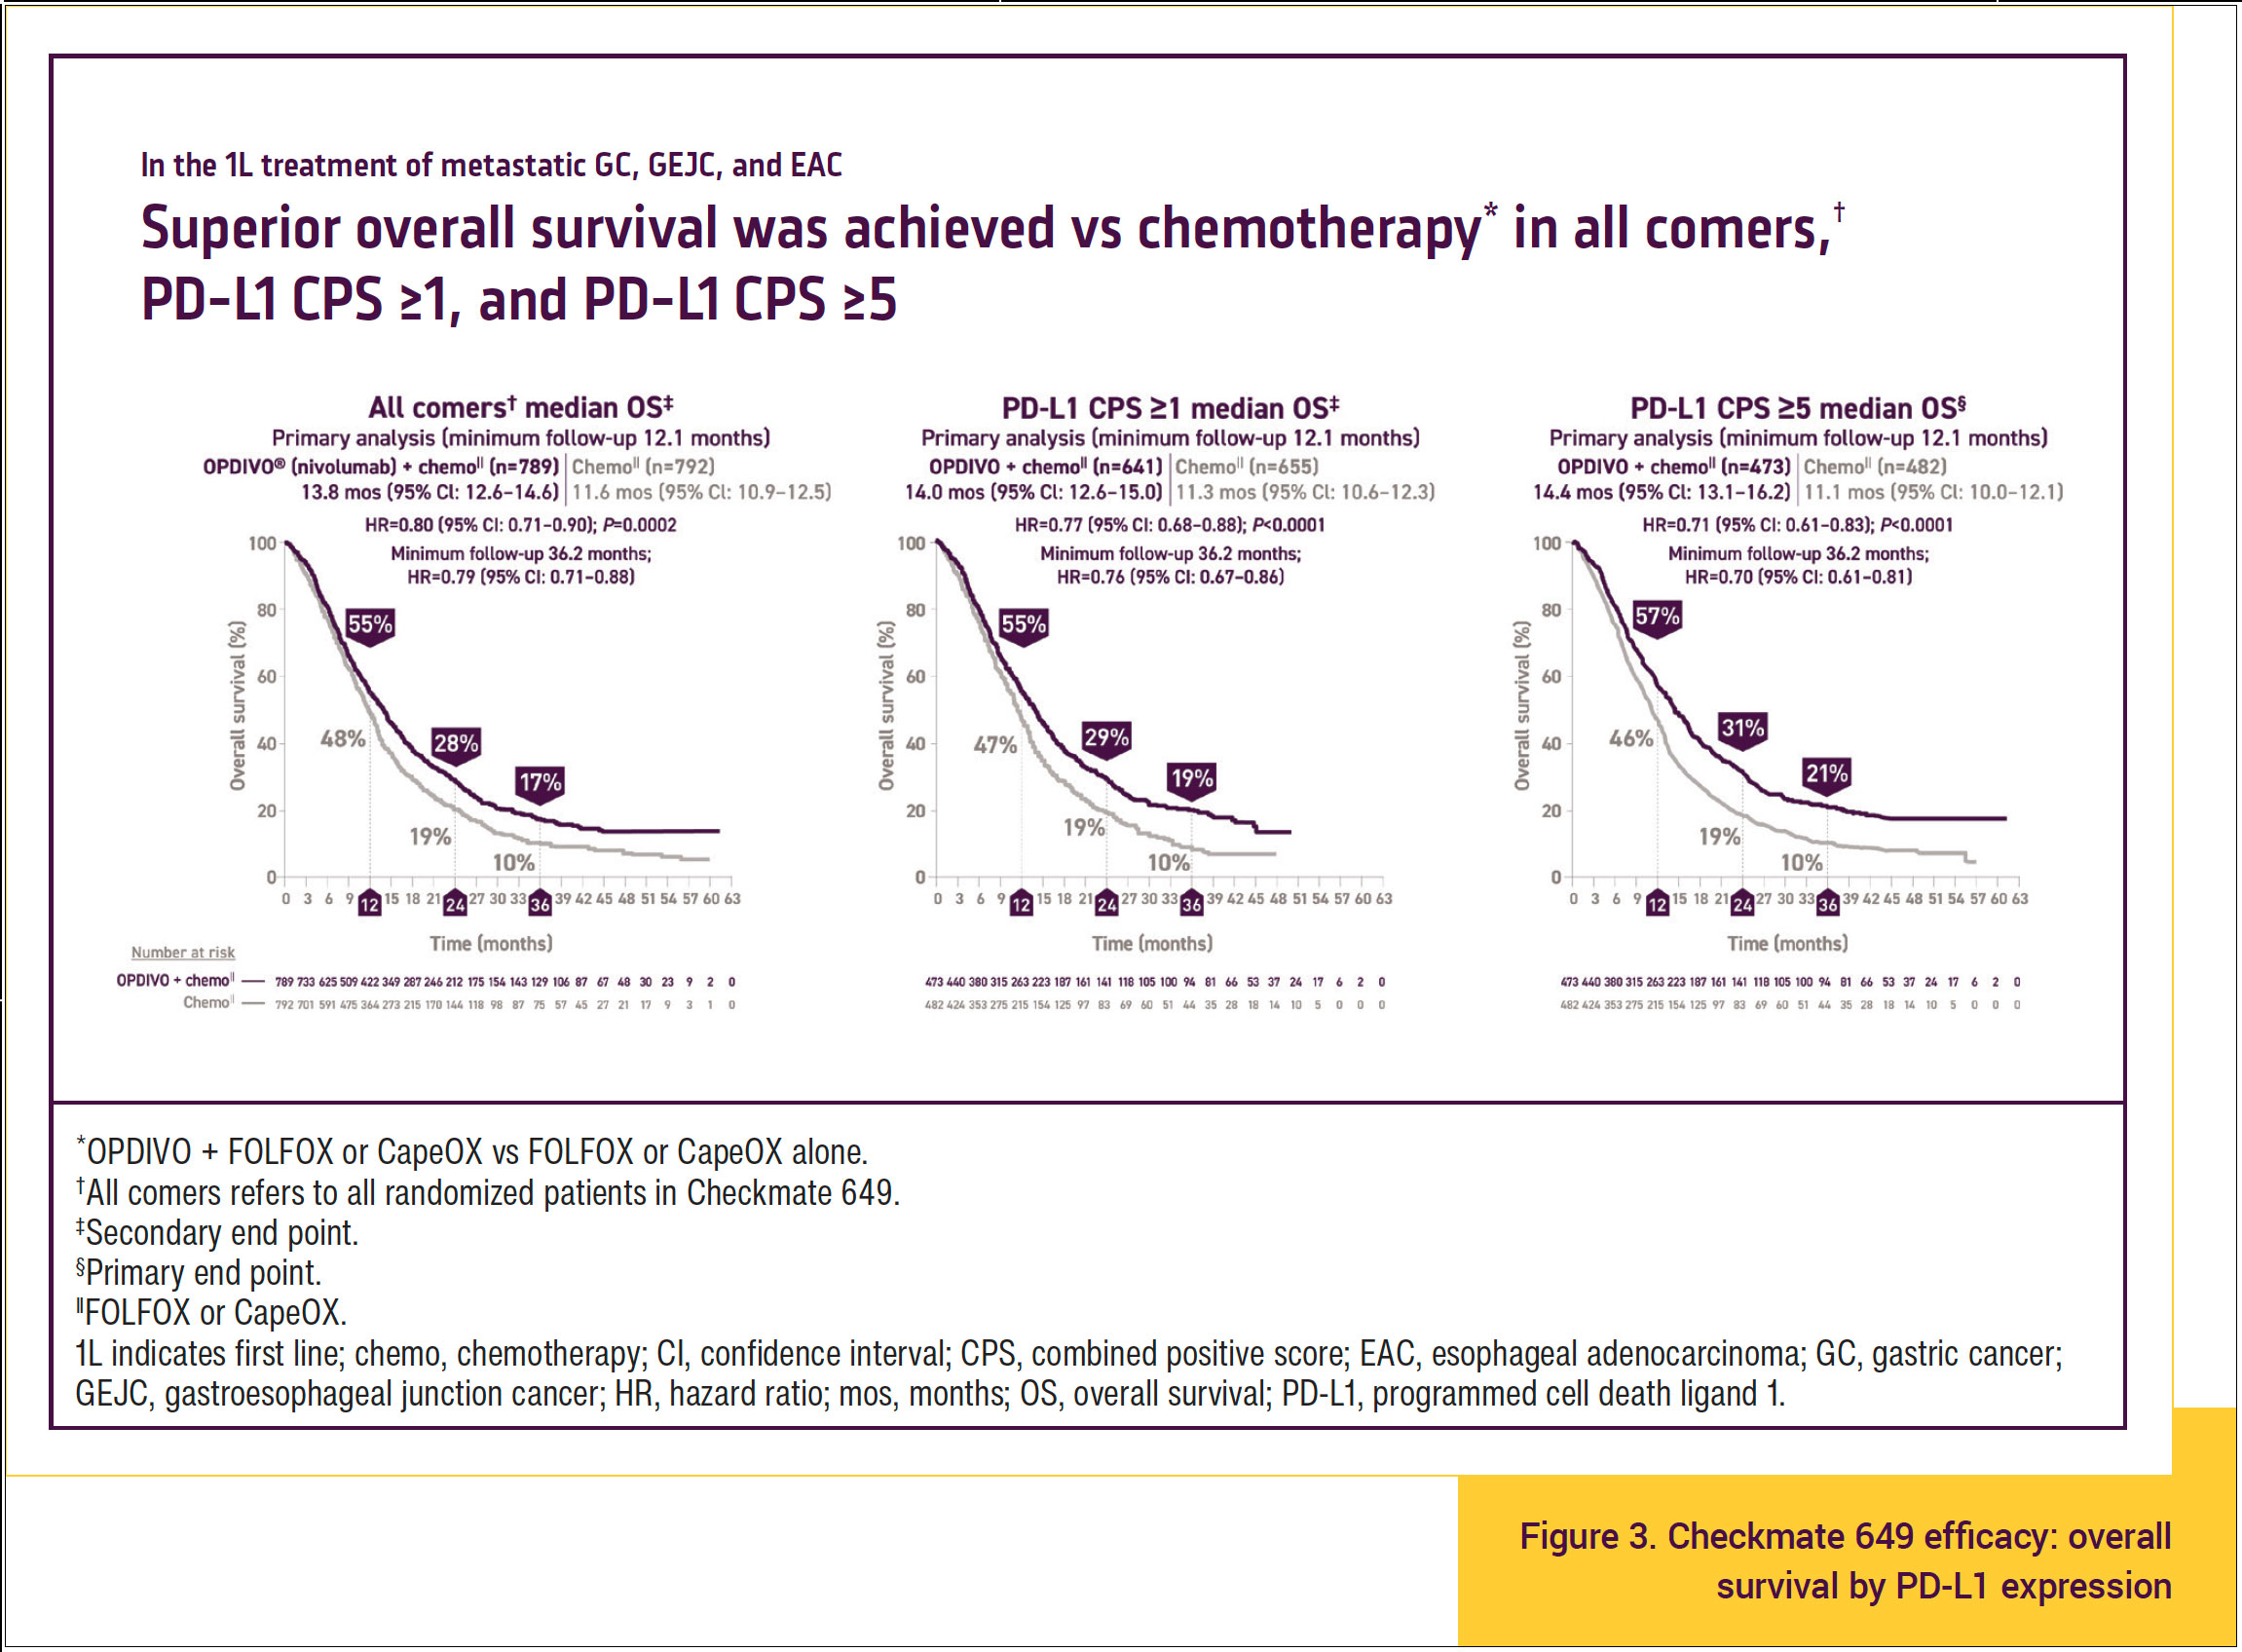 Figure 3. Checkmate 649 efficacy: overall survival by PD-L1 expression